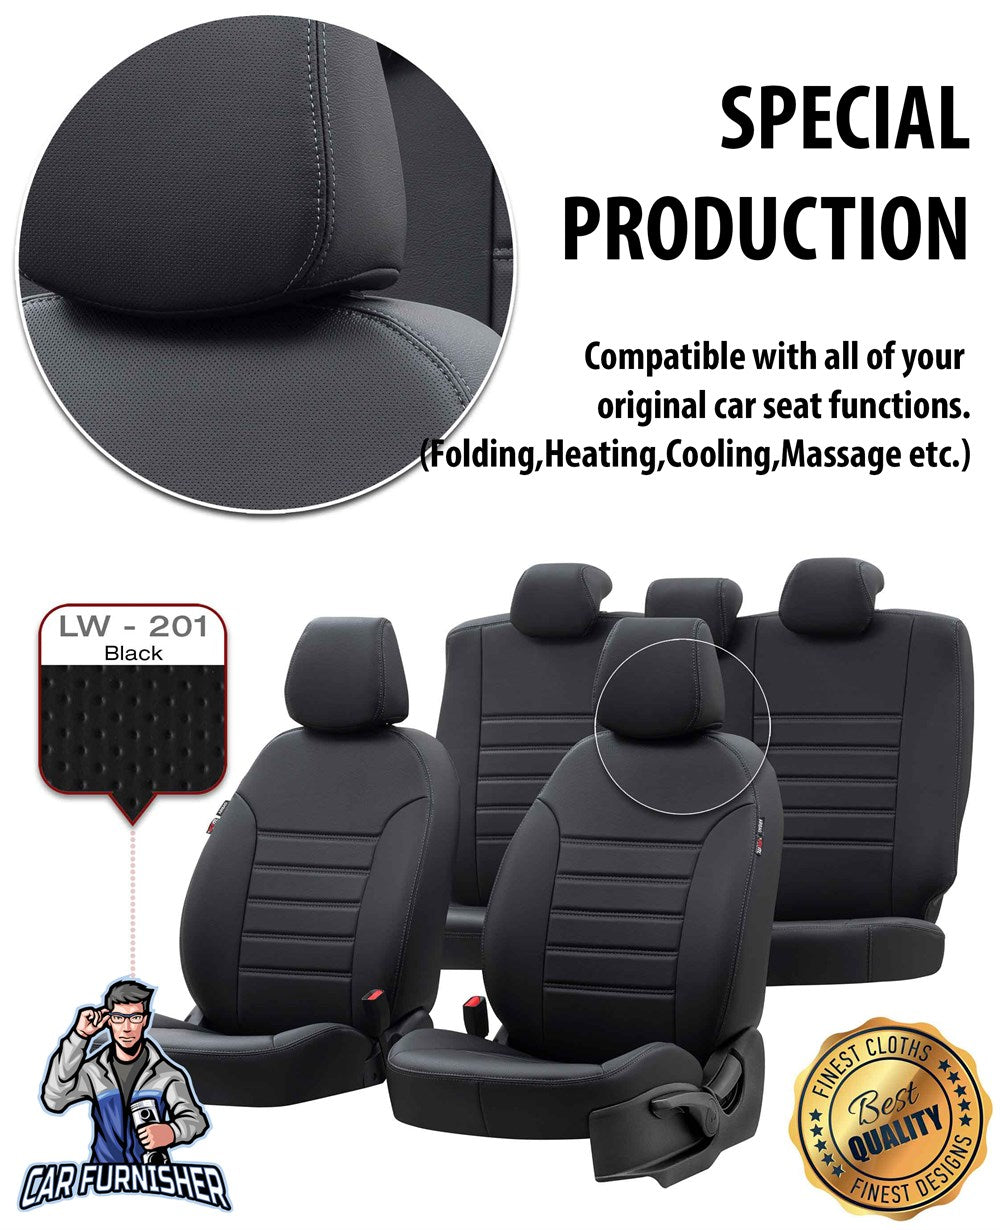 Seat Ibiza Seat Covers Istanbul Leather Design Smoked Black Leather